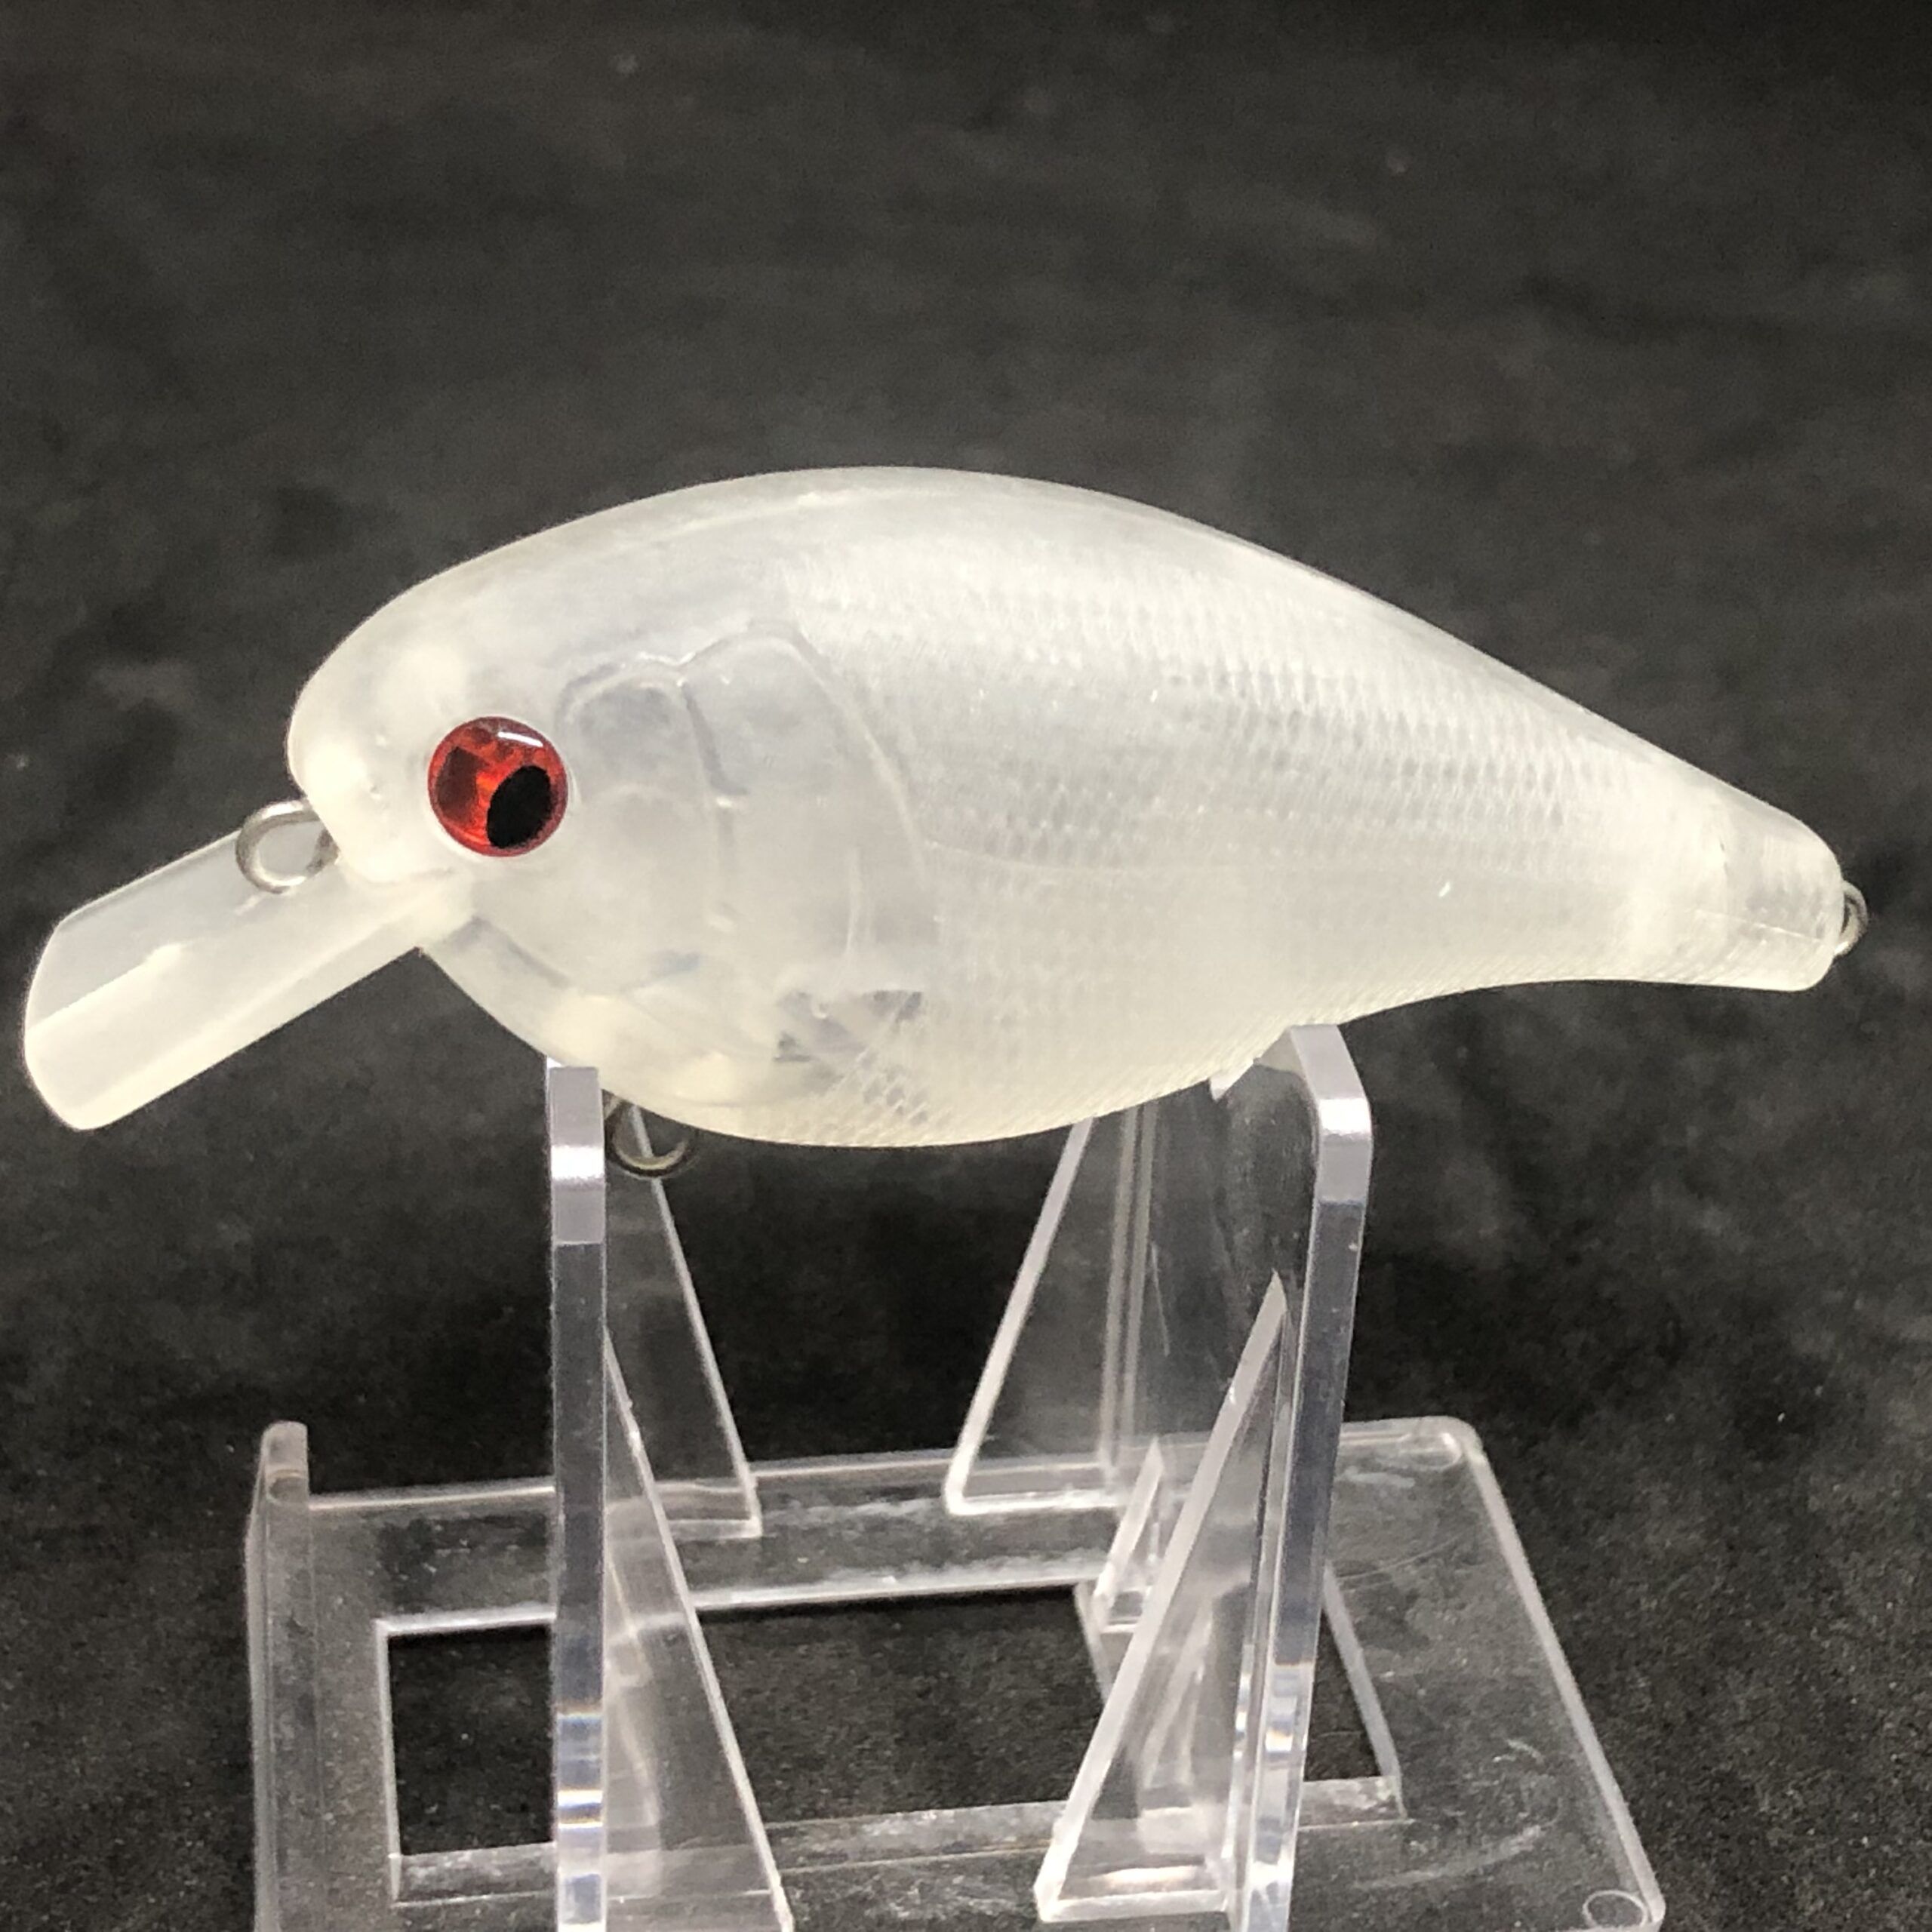 3.0 Square Bill Crankbait (order 6mm eyes) – Backwater.Outfitting